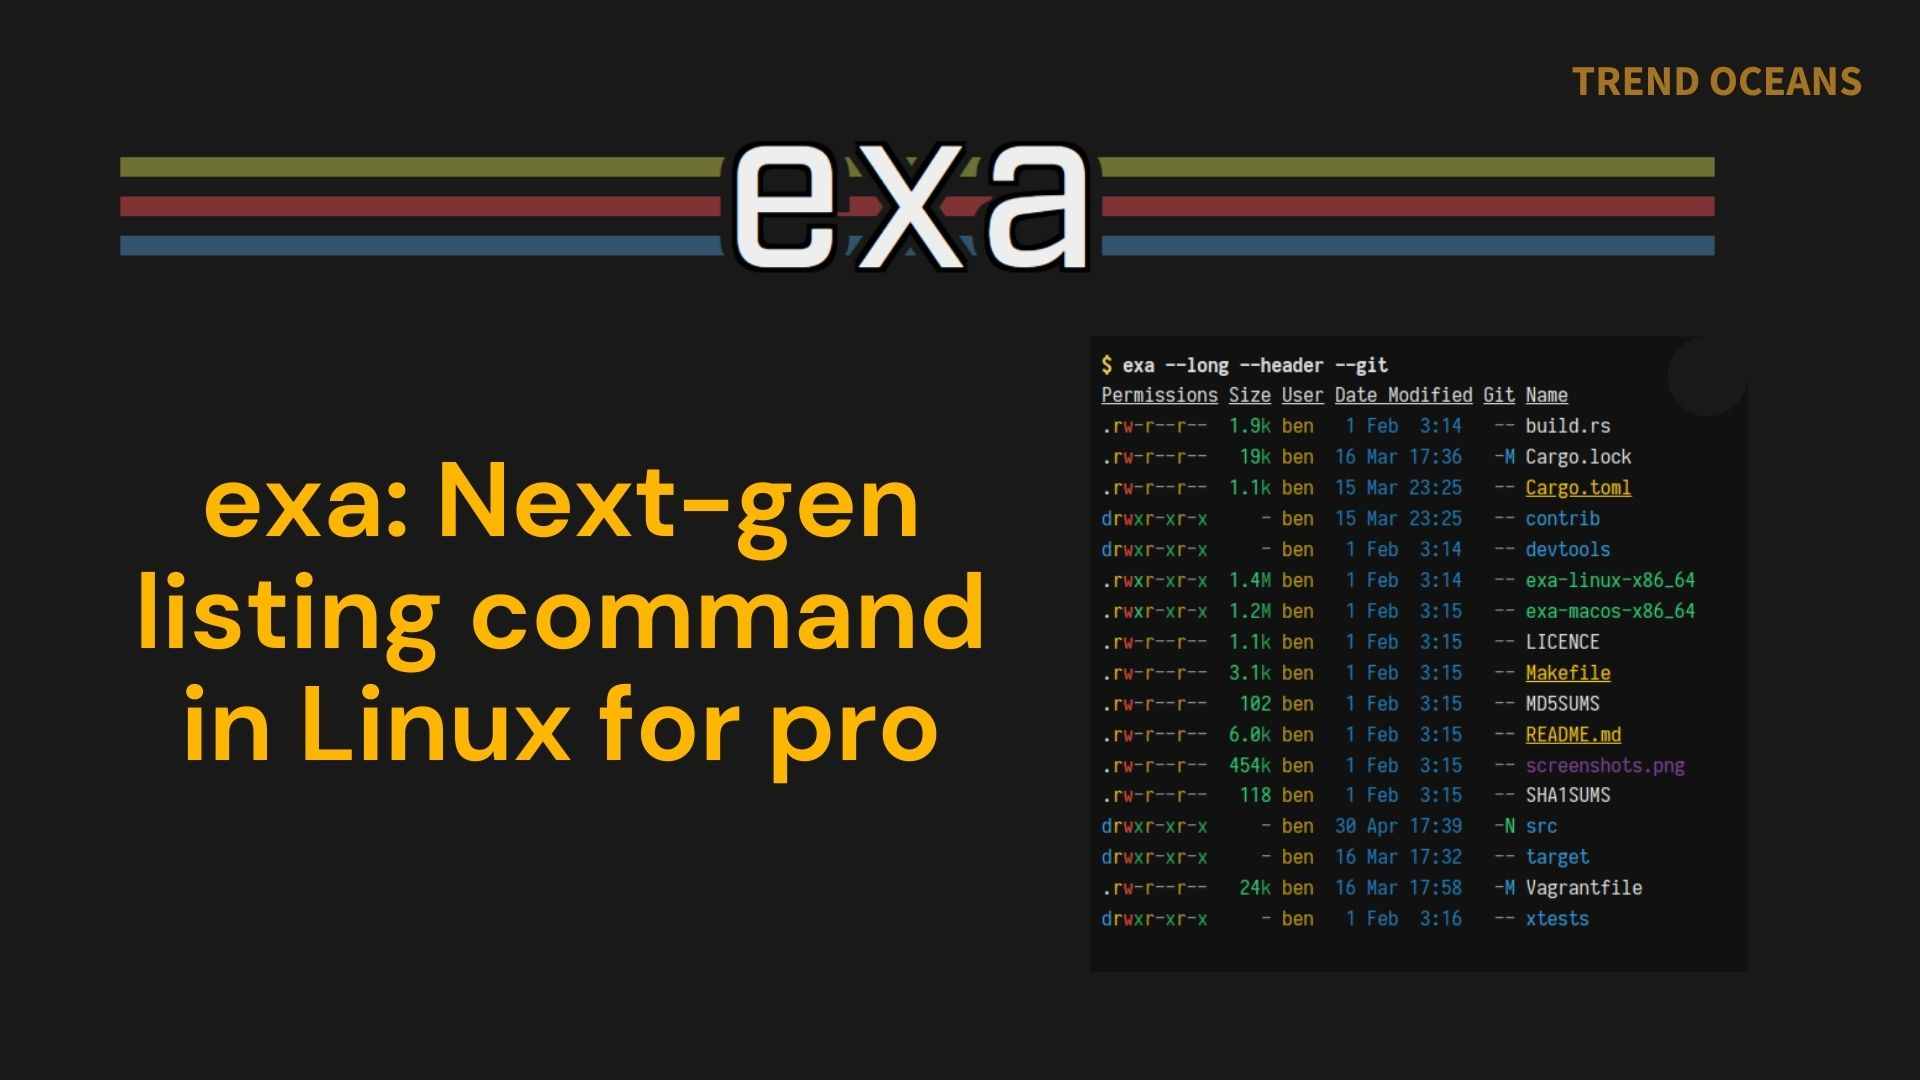 exa: Next-gen listing command in Linux for pro